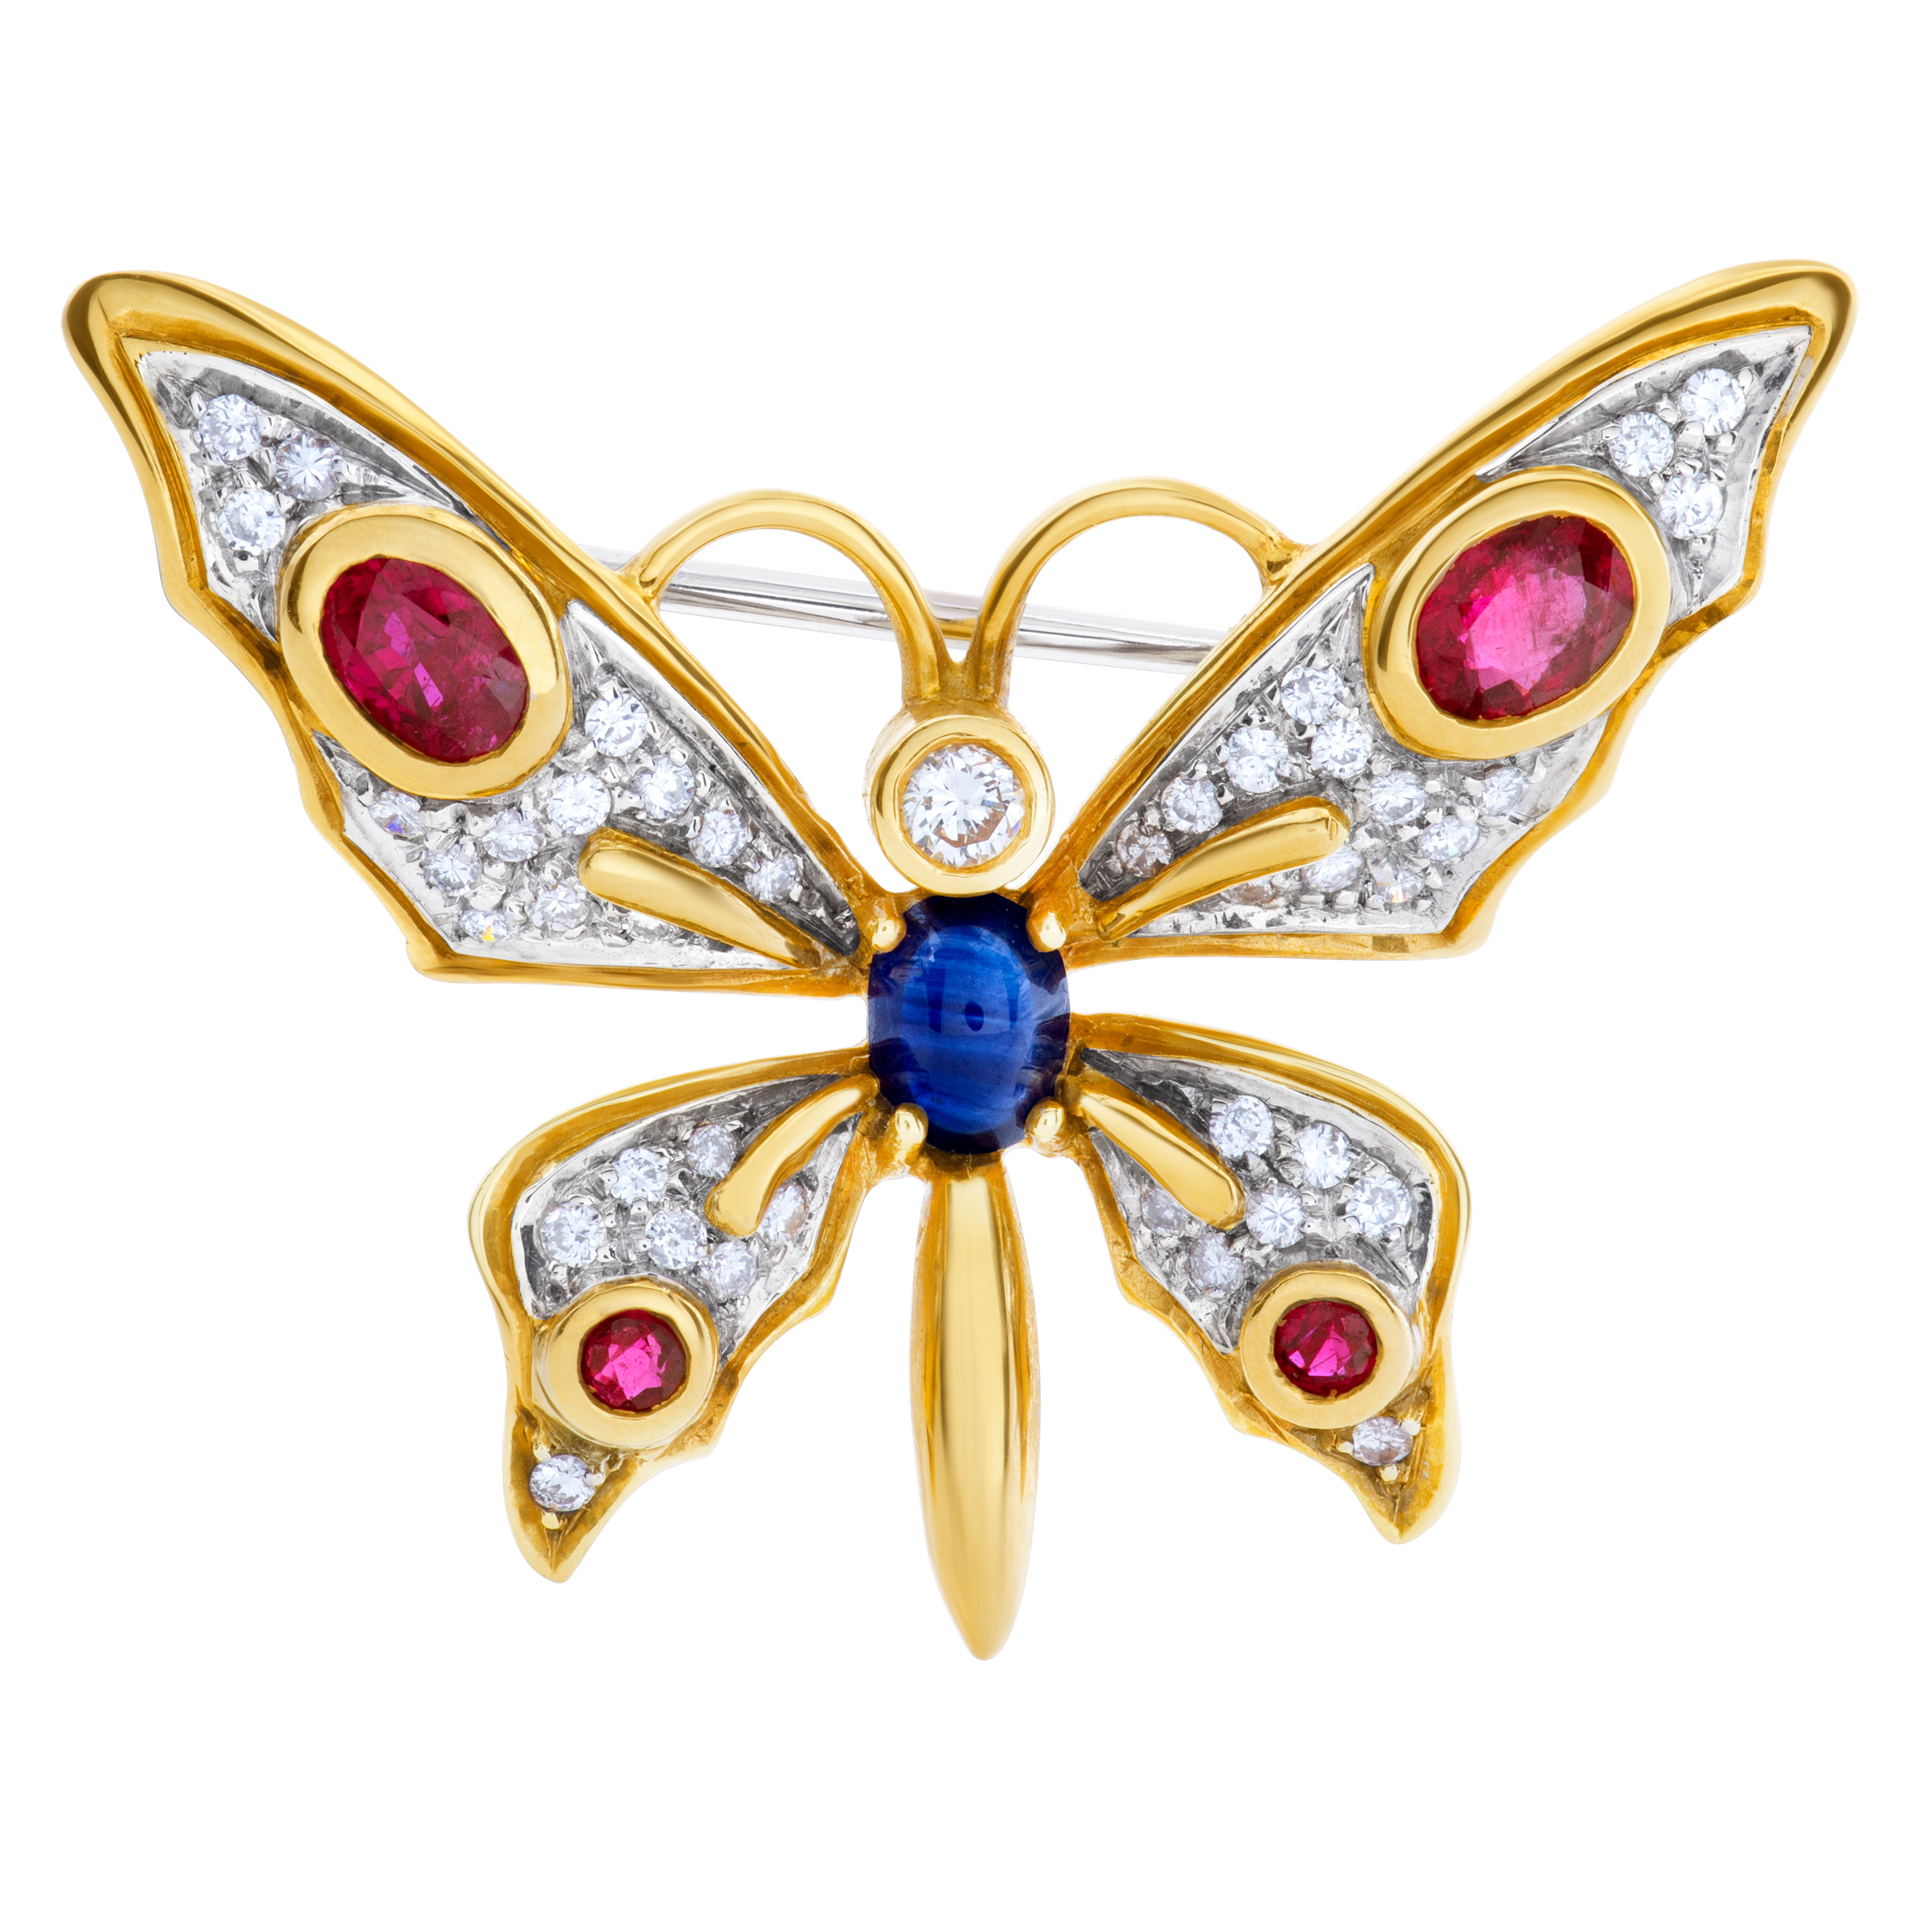 Designer signed "1925 AL" Butterfly pin with rubies, diamonds & cabochon sapphire image 1